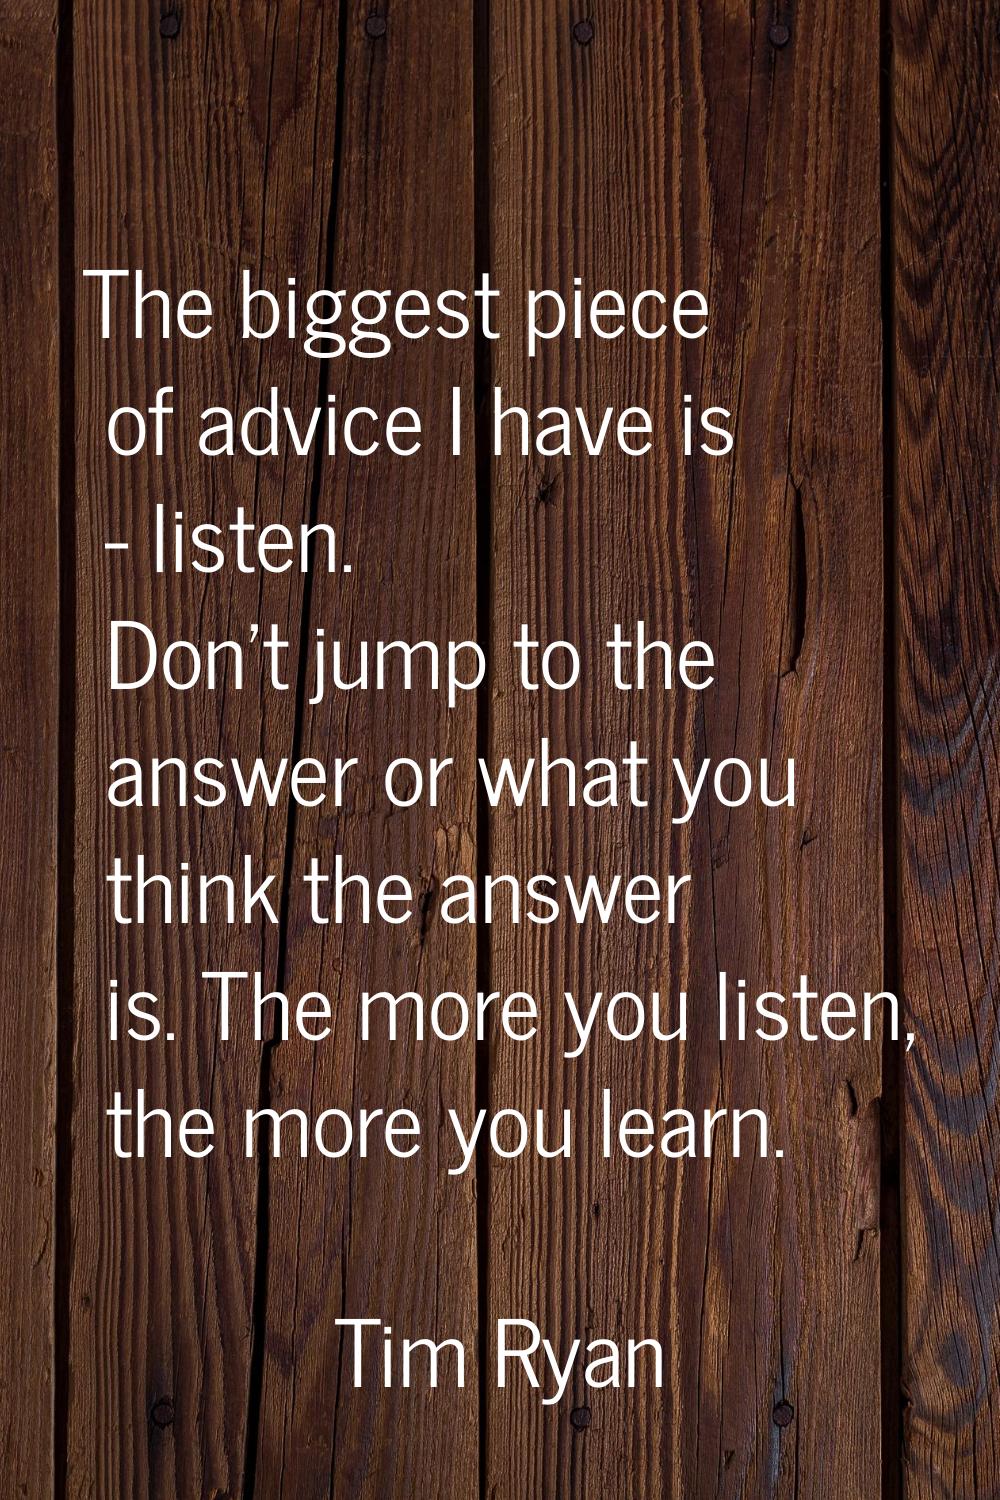 The biggest piece of advice I have is - listen. Don't jump to the answer or what you think the answ